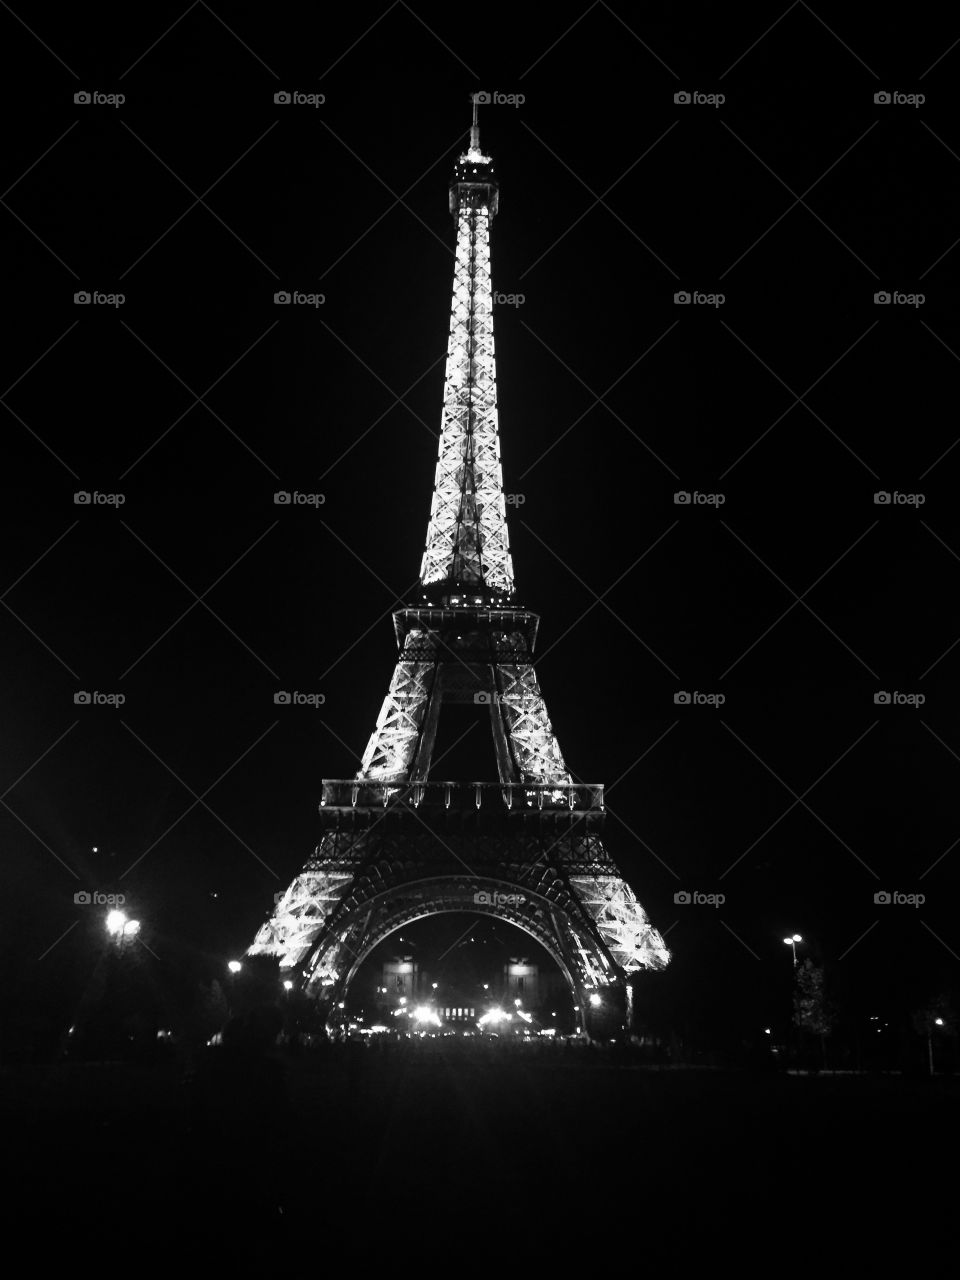 Eiffel Tower at night in black and white